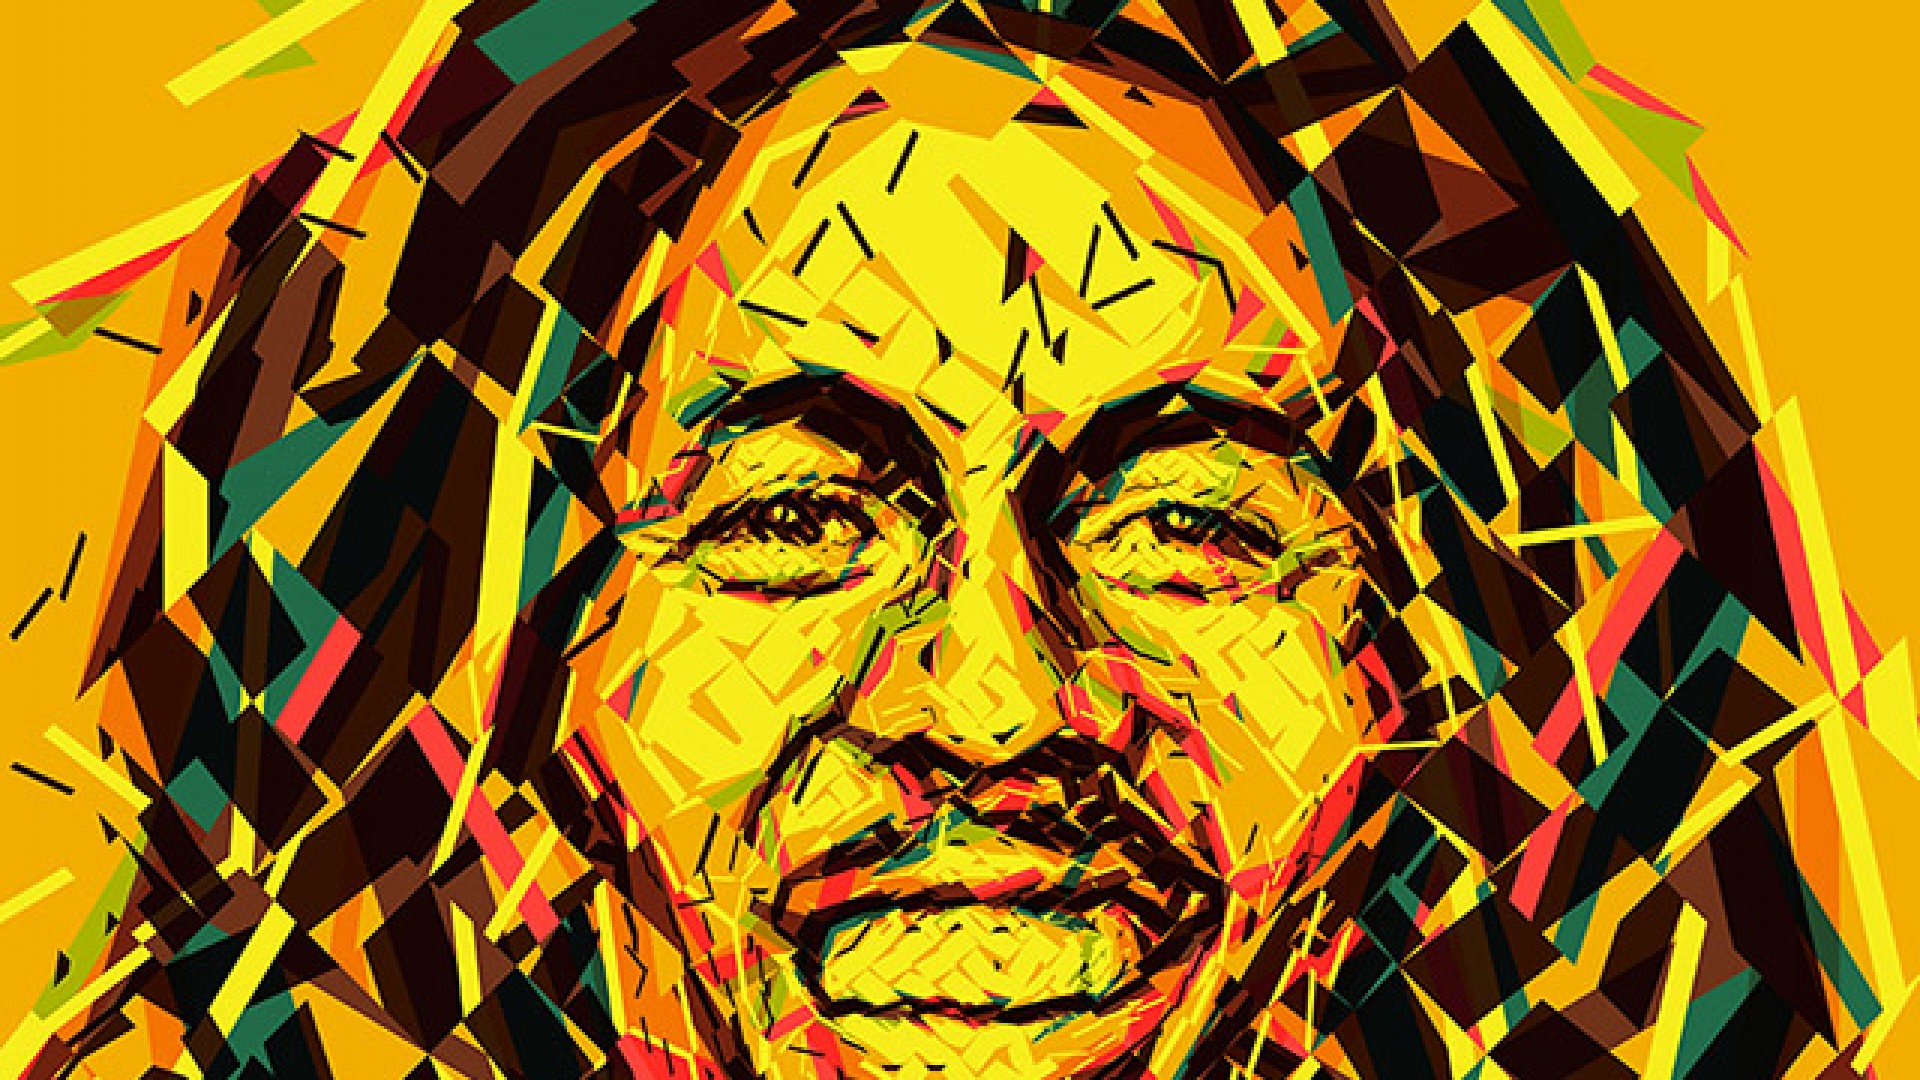 Bob Marley Wallpaper Pictures Image